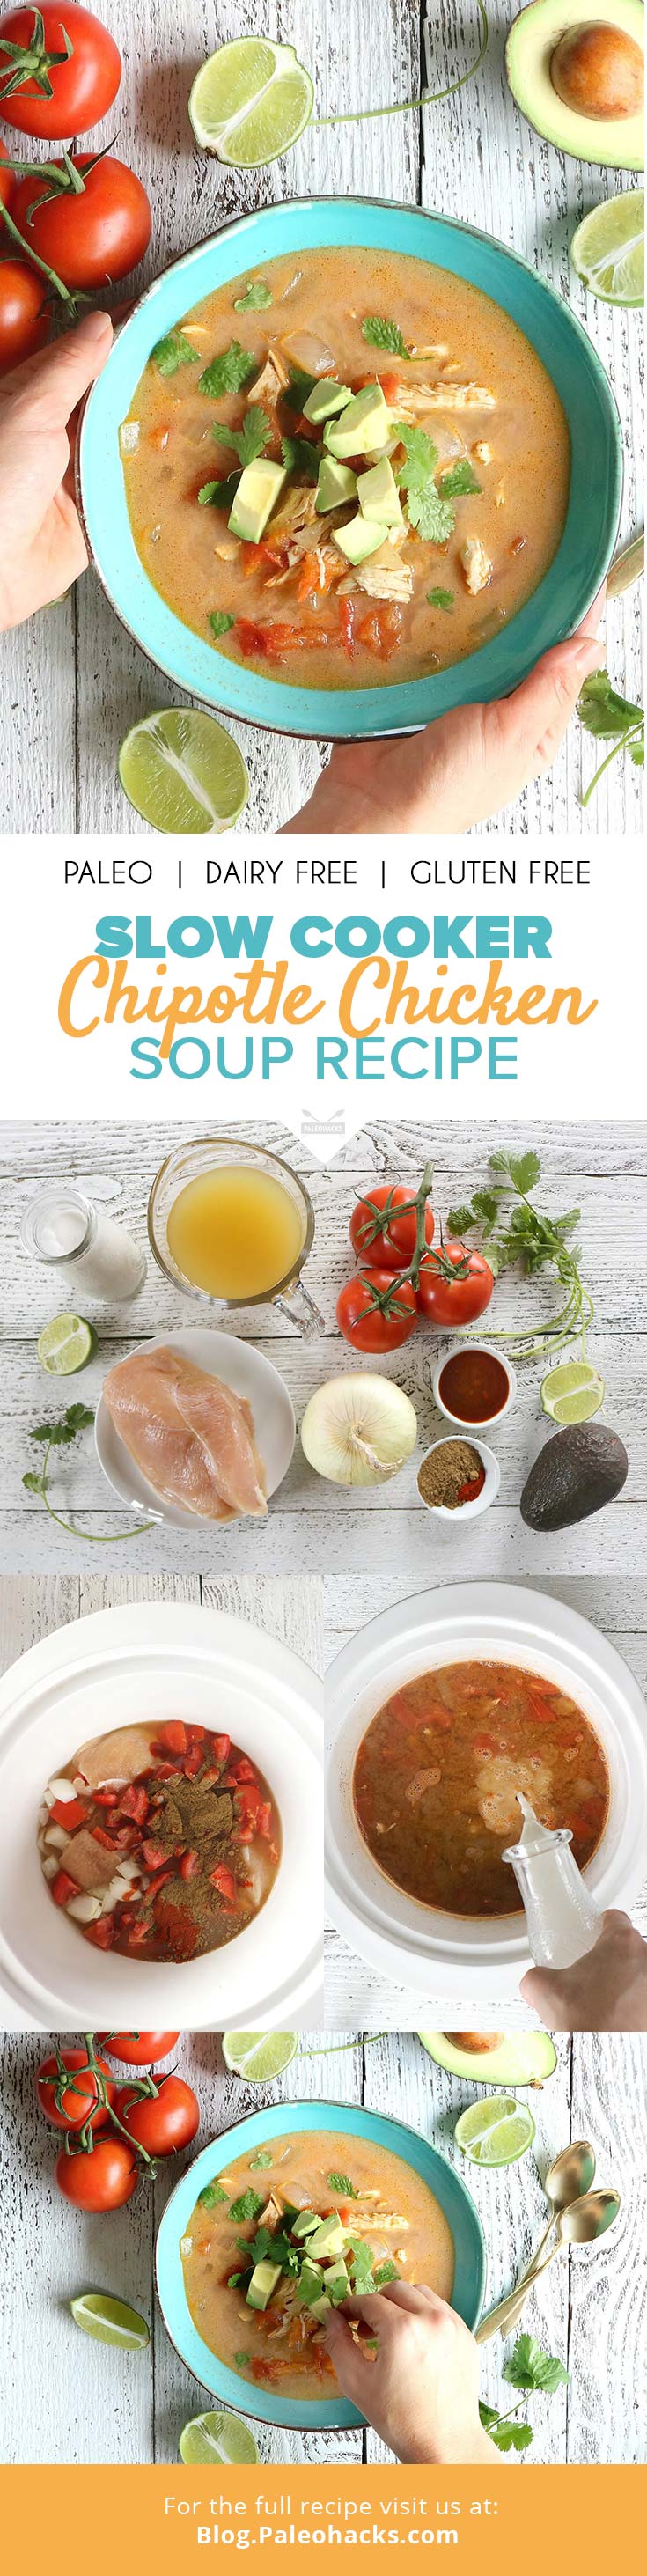 This 3-step smoky slow cooker chipotle chicken soup is sure to become a staple. Coconut milk adds a light creaminess to this hearty, protein-packed recipe.